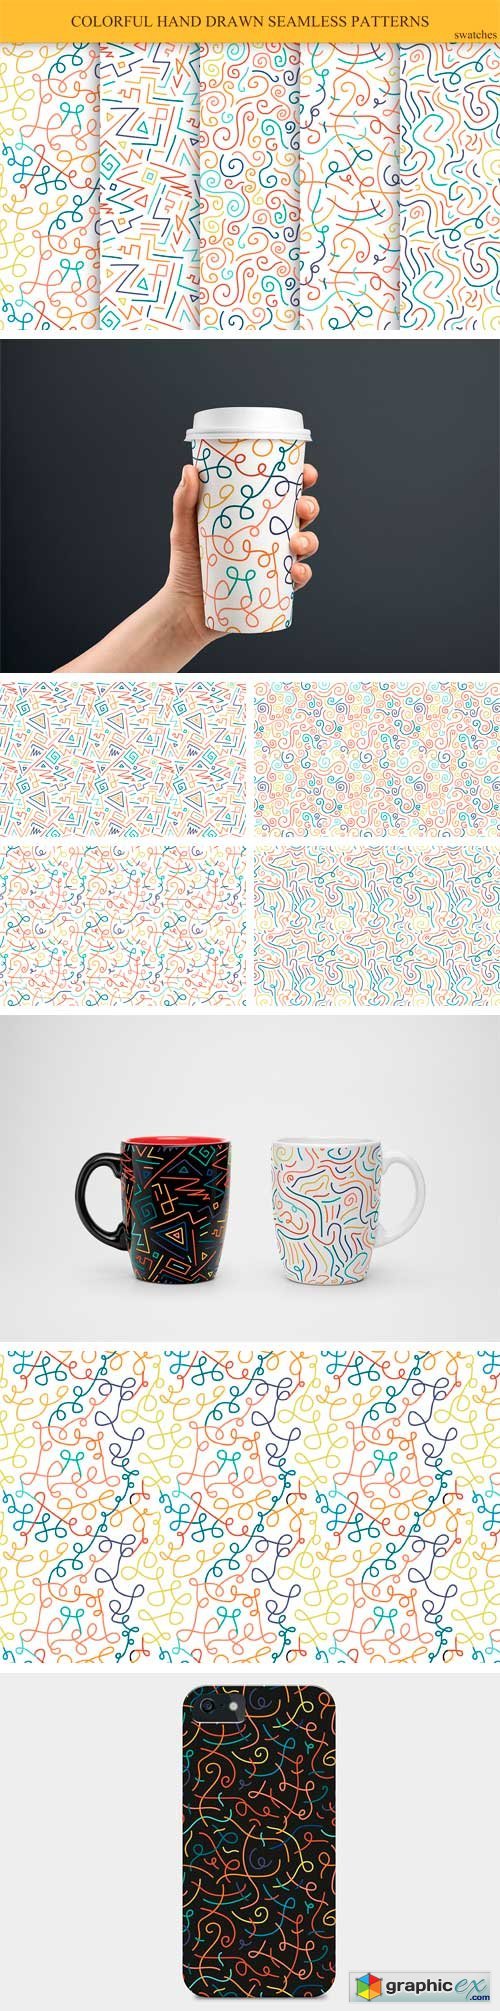 Hand Drawn Seamless Color Patterns